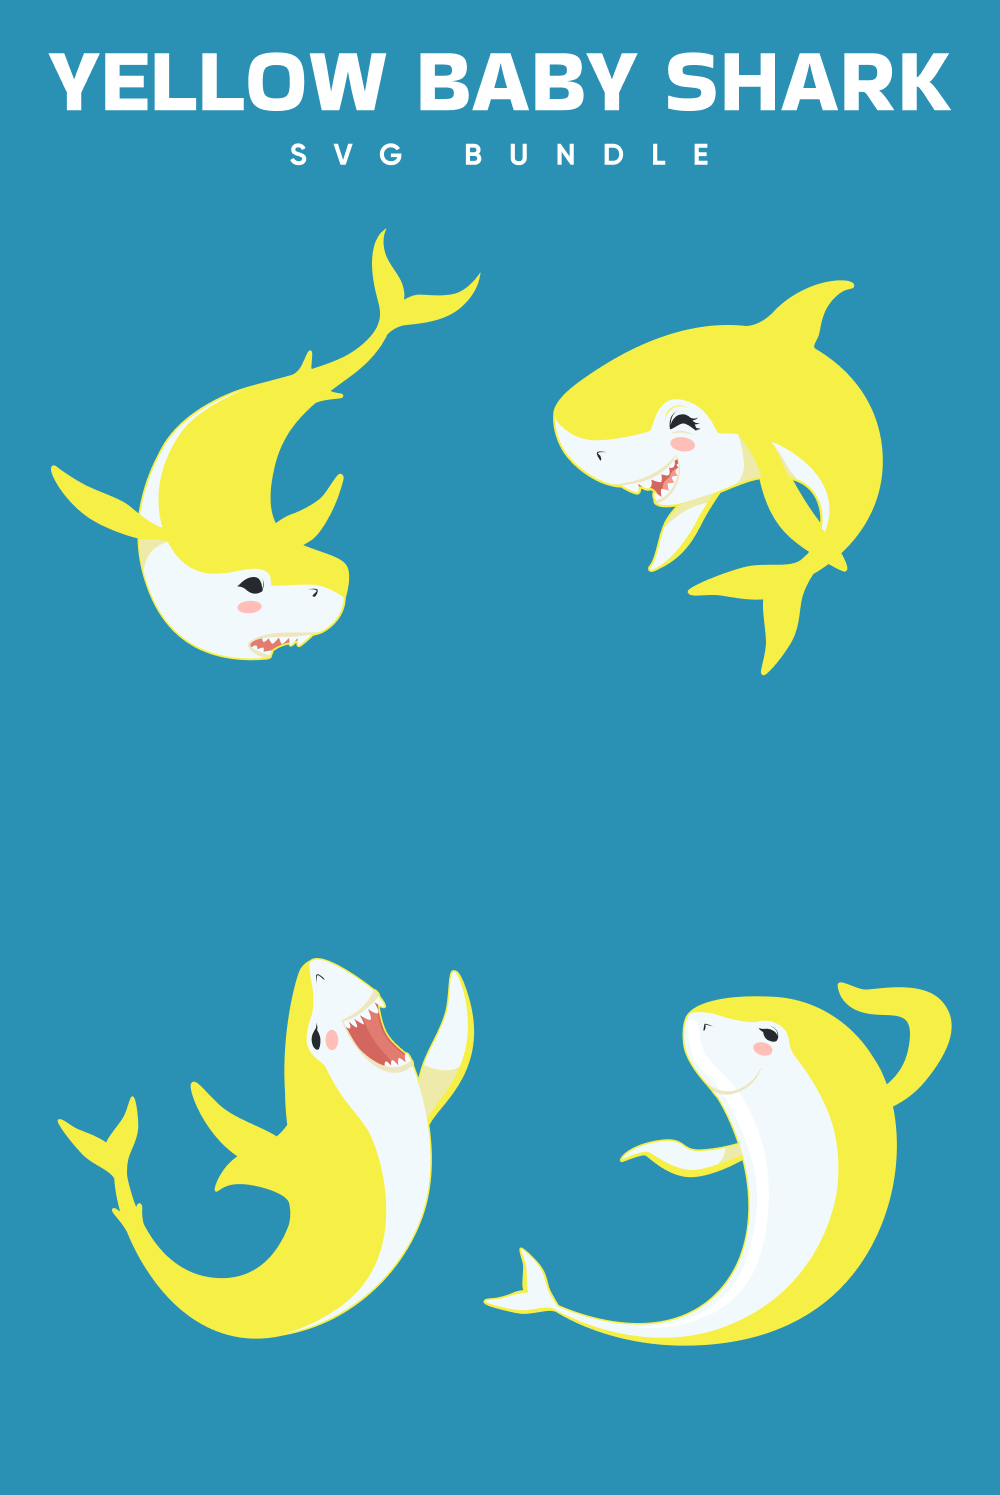 A yellow baby shark is laughing and having fun in the blue water.